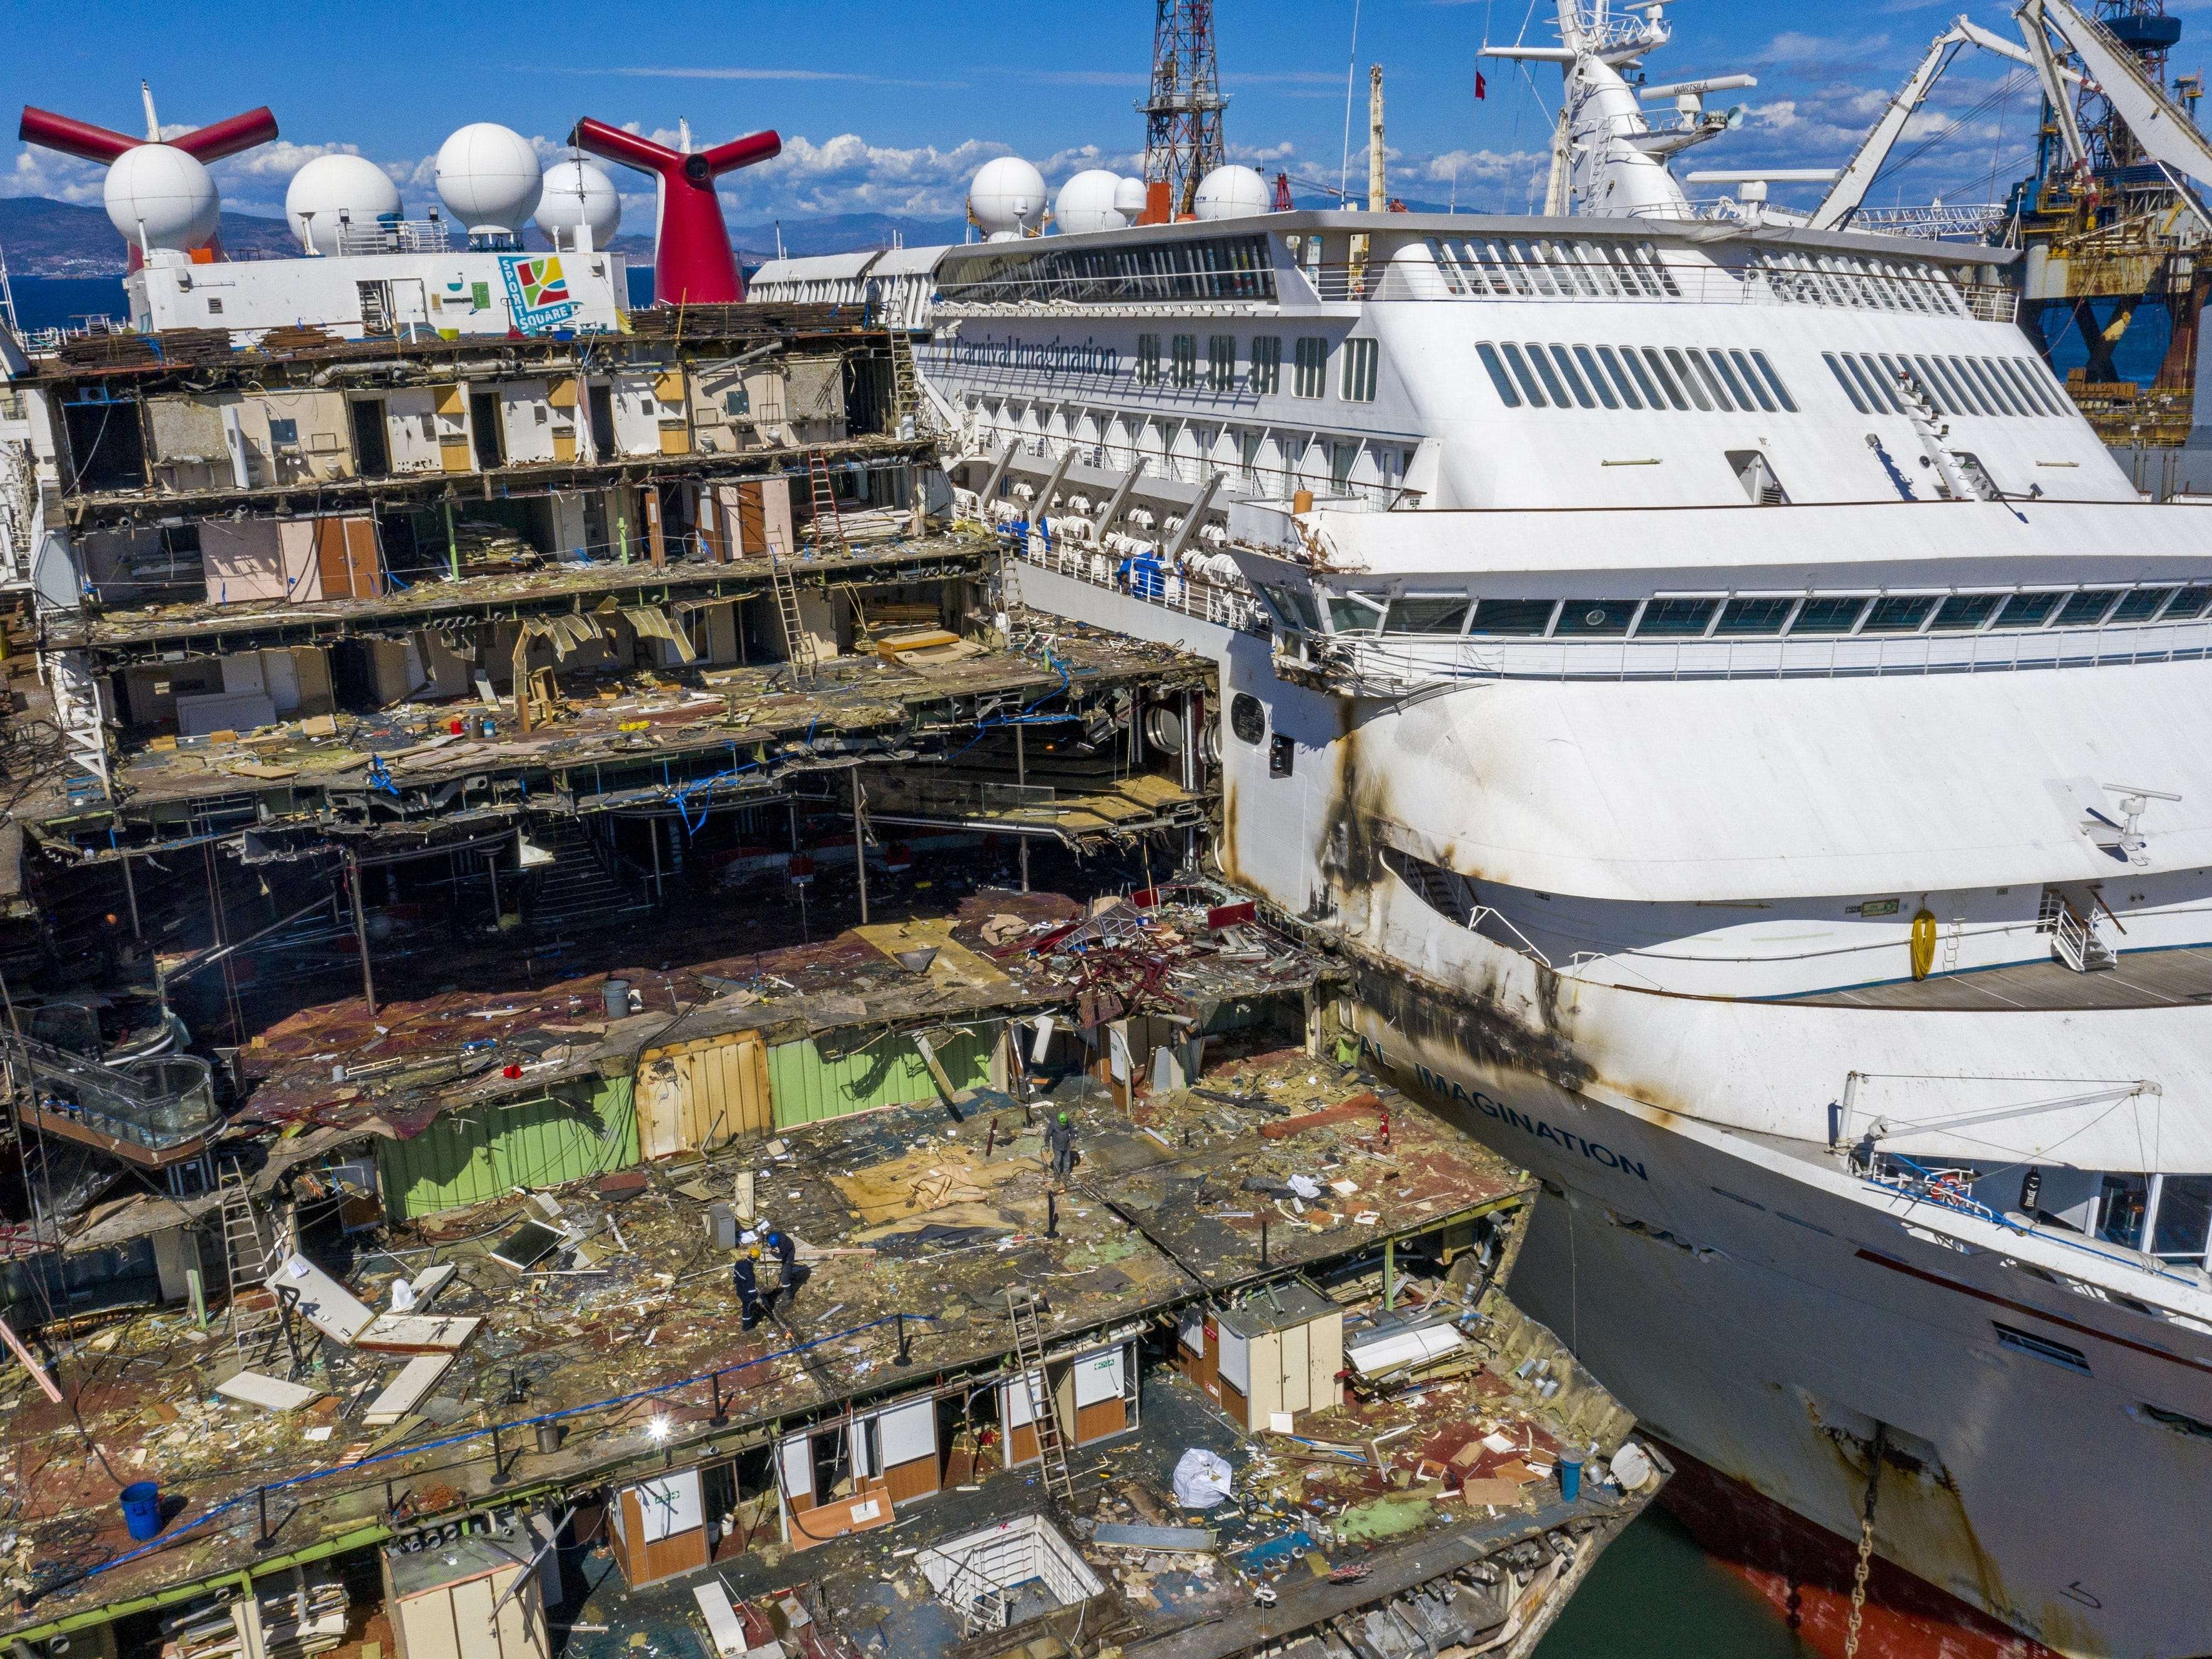 Photos of abandoned, stripped cruise ships show how deeply the cruise ...